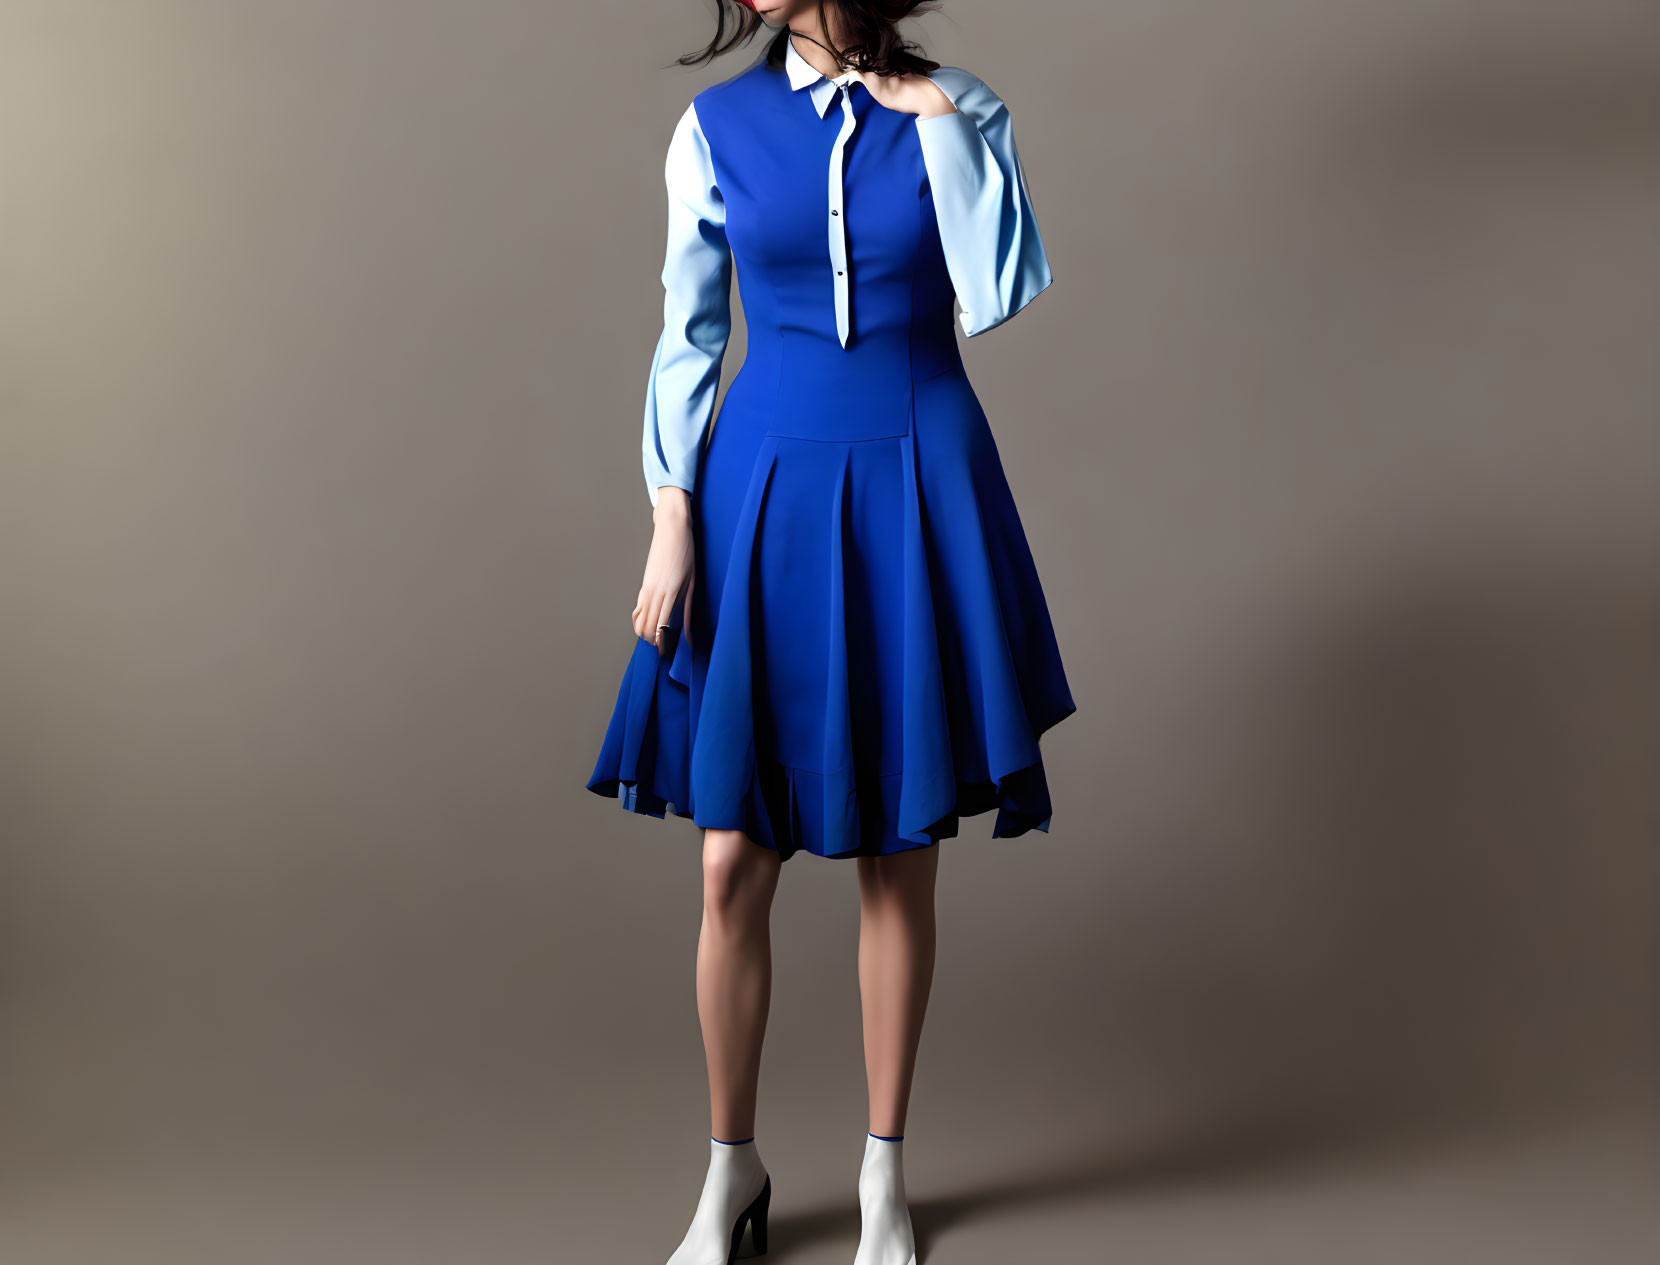 Woman in Blue Pleated Dress and White Boots Poses Stylishly